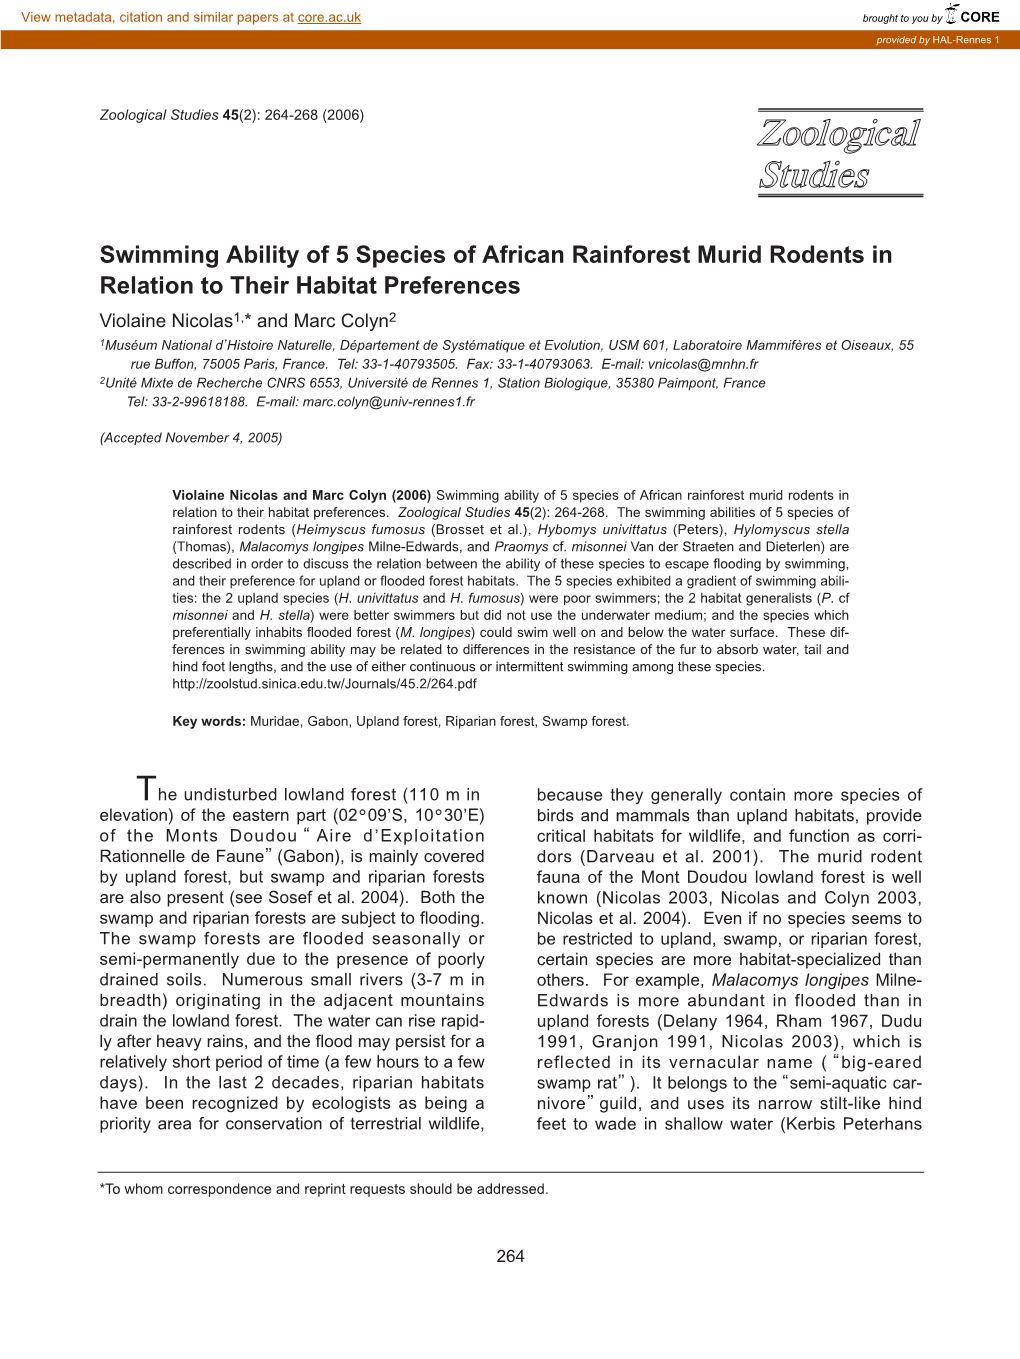 Swimming Ability of 5 Species of African Rainforest Murid Rodents In